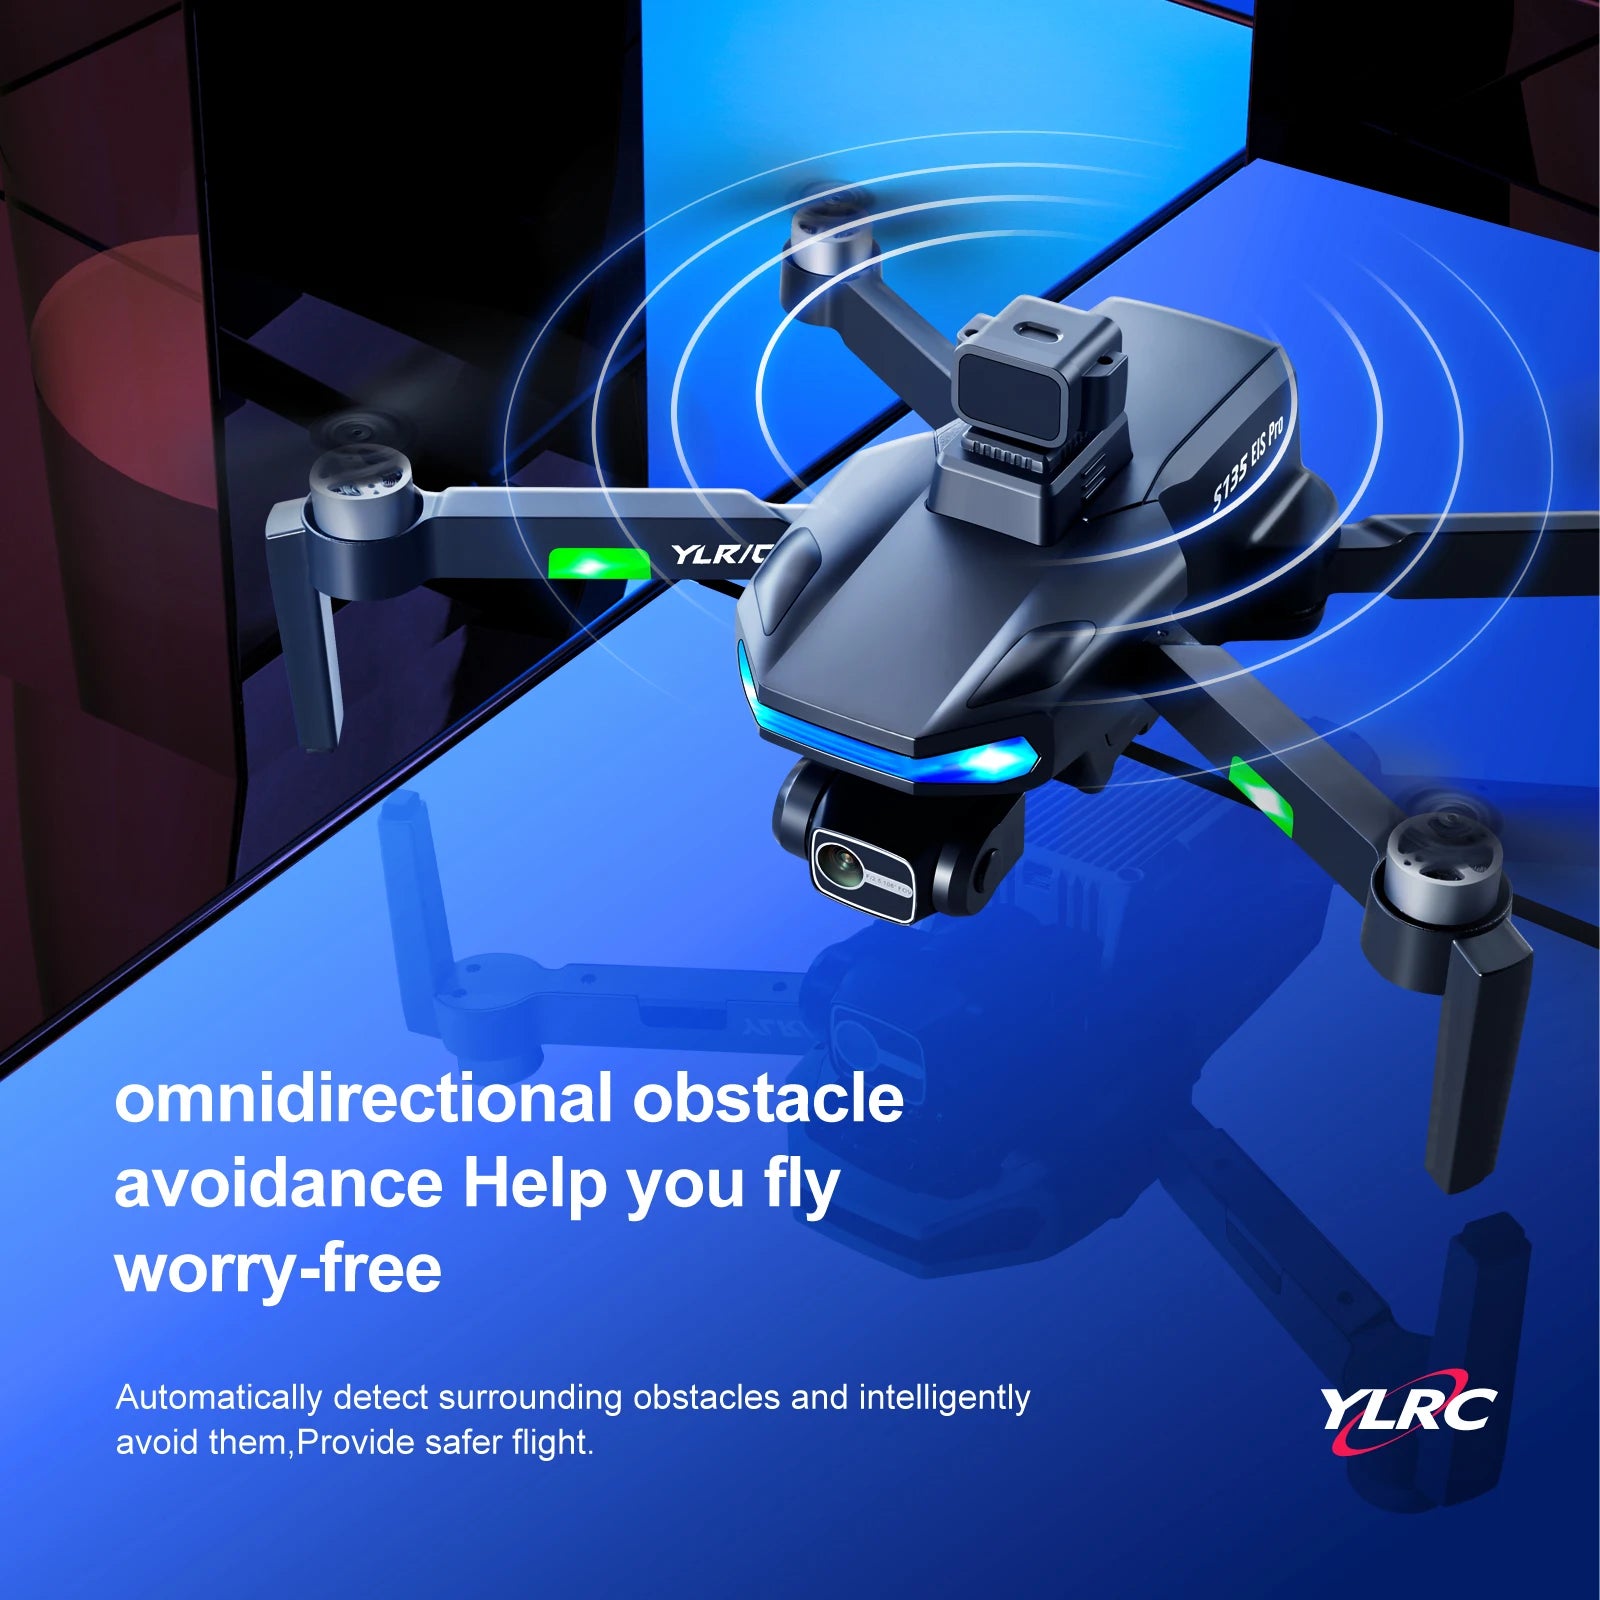 S135 Drone, YLRIG omnidirectional obstacle avoidance Help you fly worry-free Automatically detect